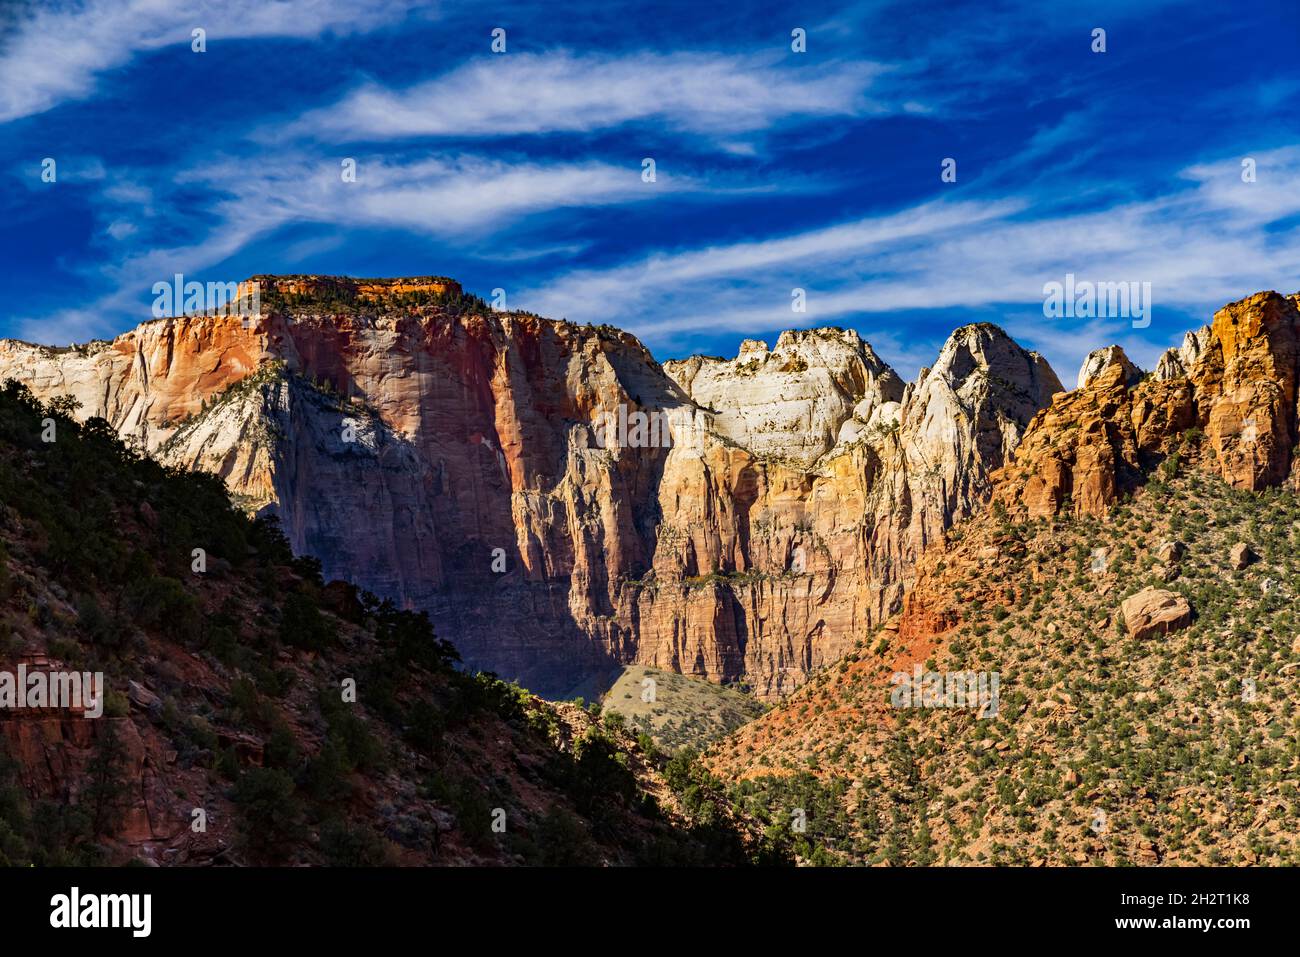 The majestic Temples and Towers of the Virgin with the West Temple formation on the left in Zion National Park near Springdale, Utah, USA. Stock Photo